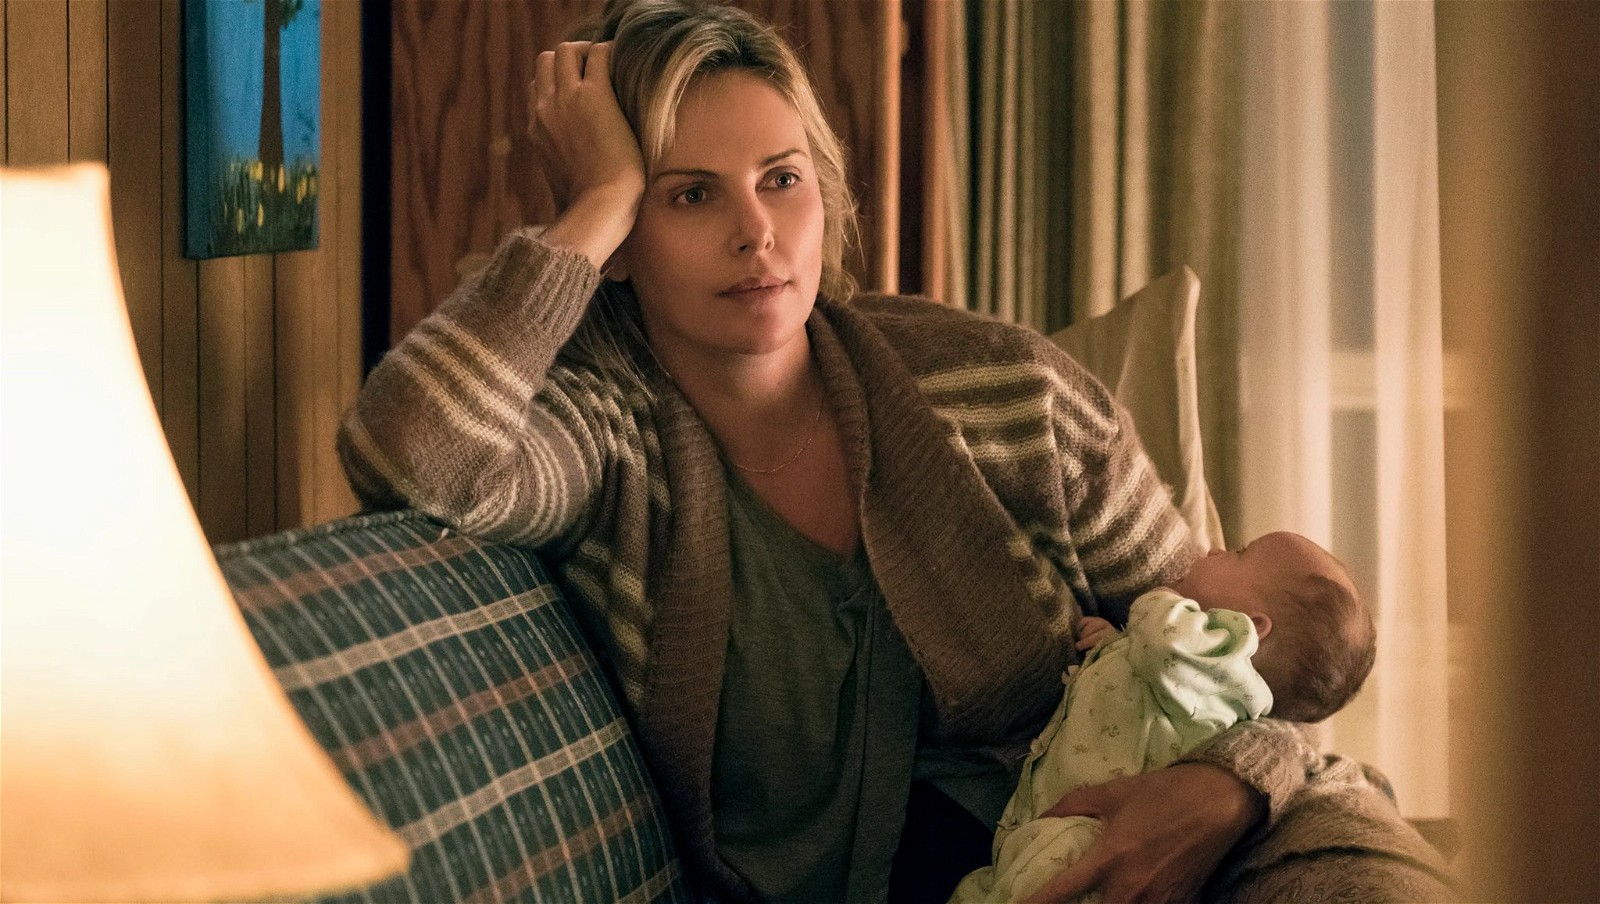 Charlize Theron felt personal connection to the script of Tully